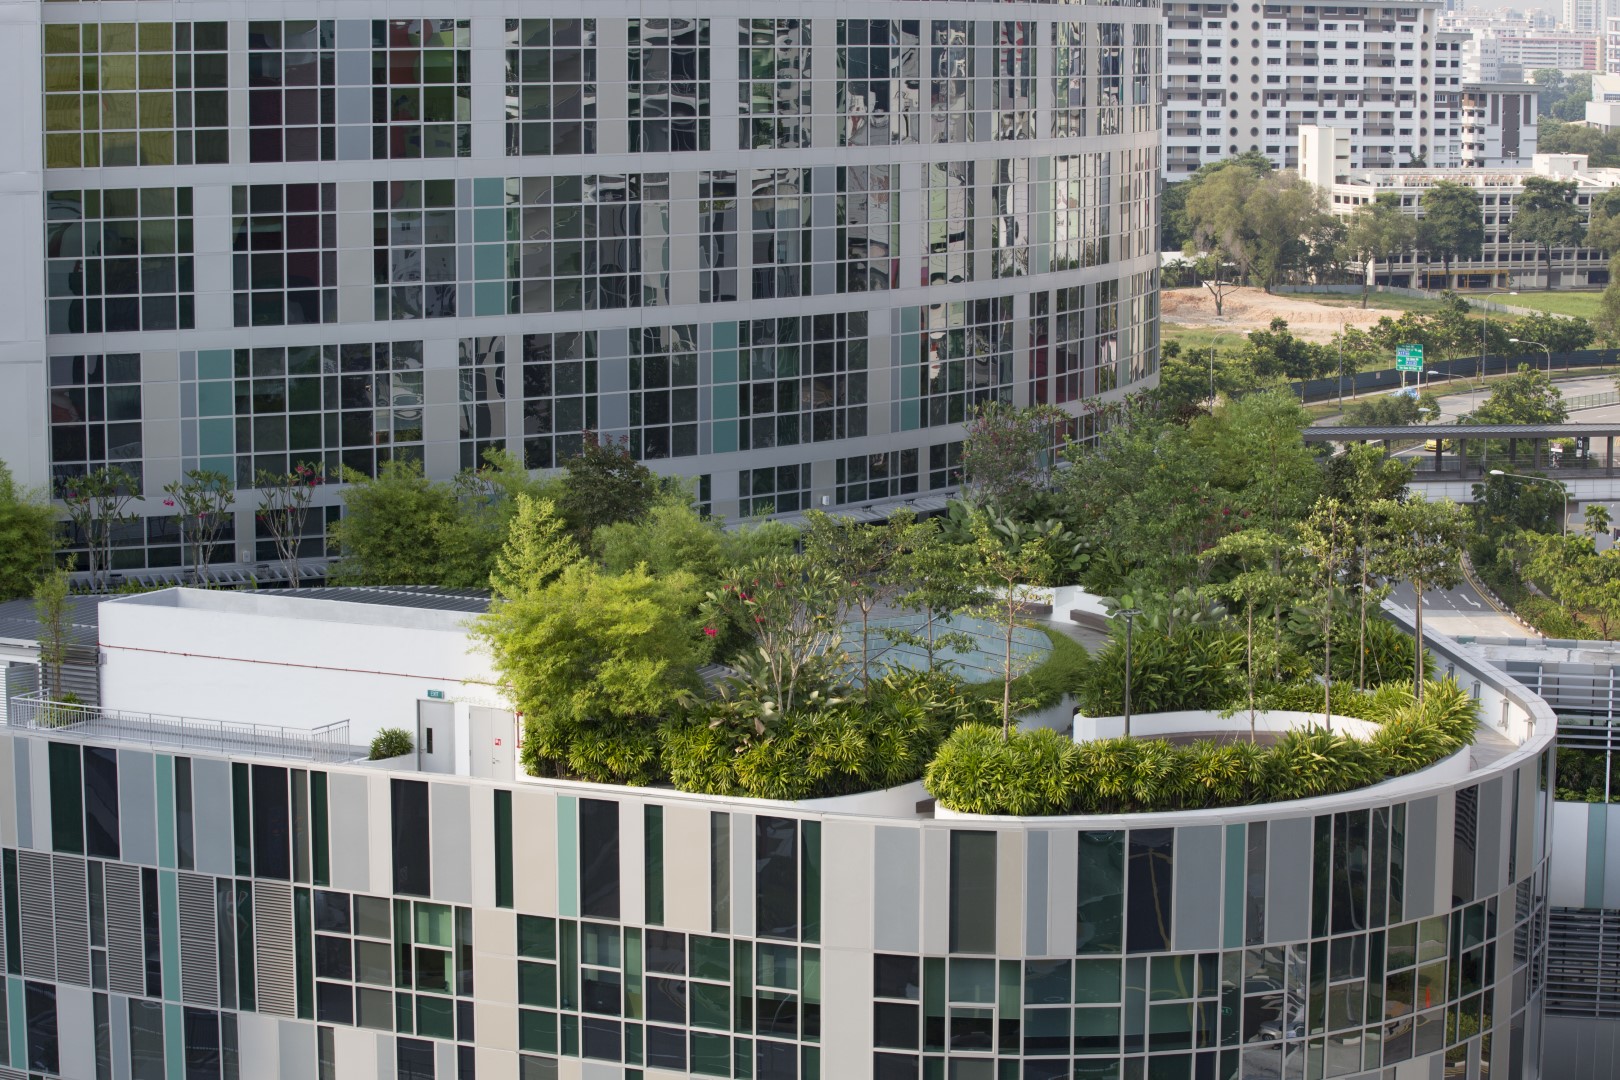 The Rooftop Garden at Ng Teng Fong Hospital provides a therapeutic respite from the urban landscape, nurturing healing